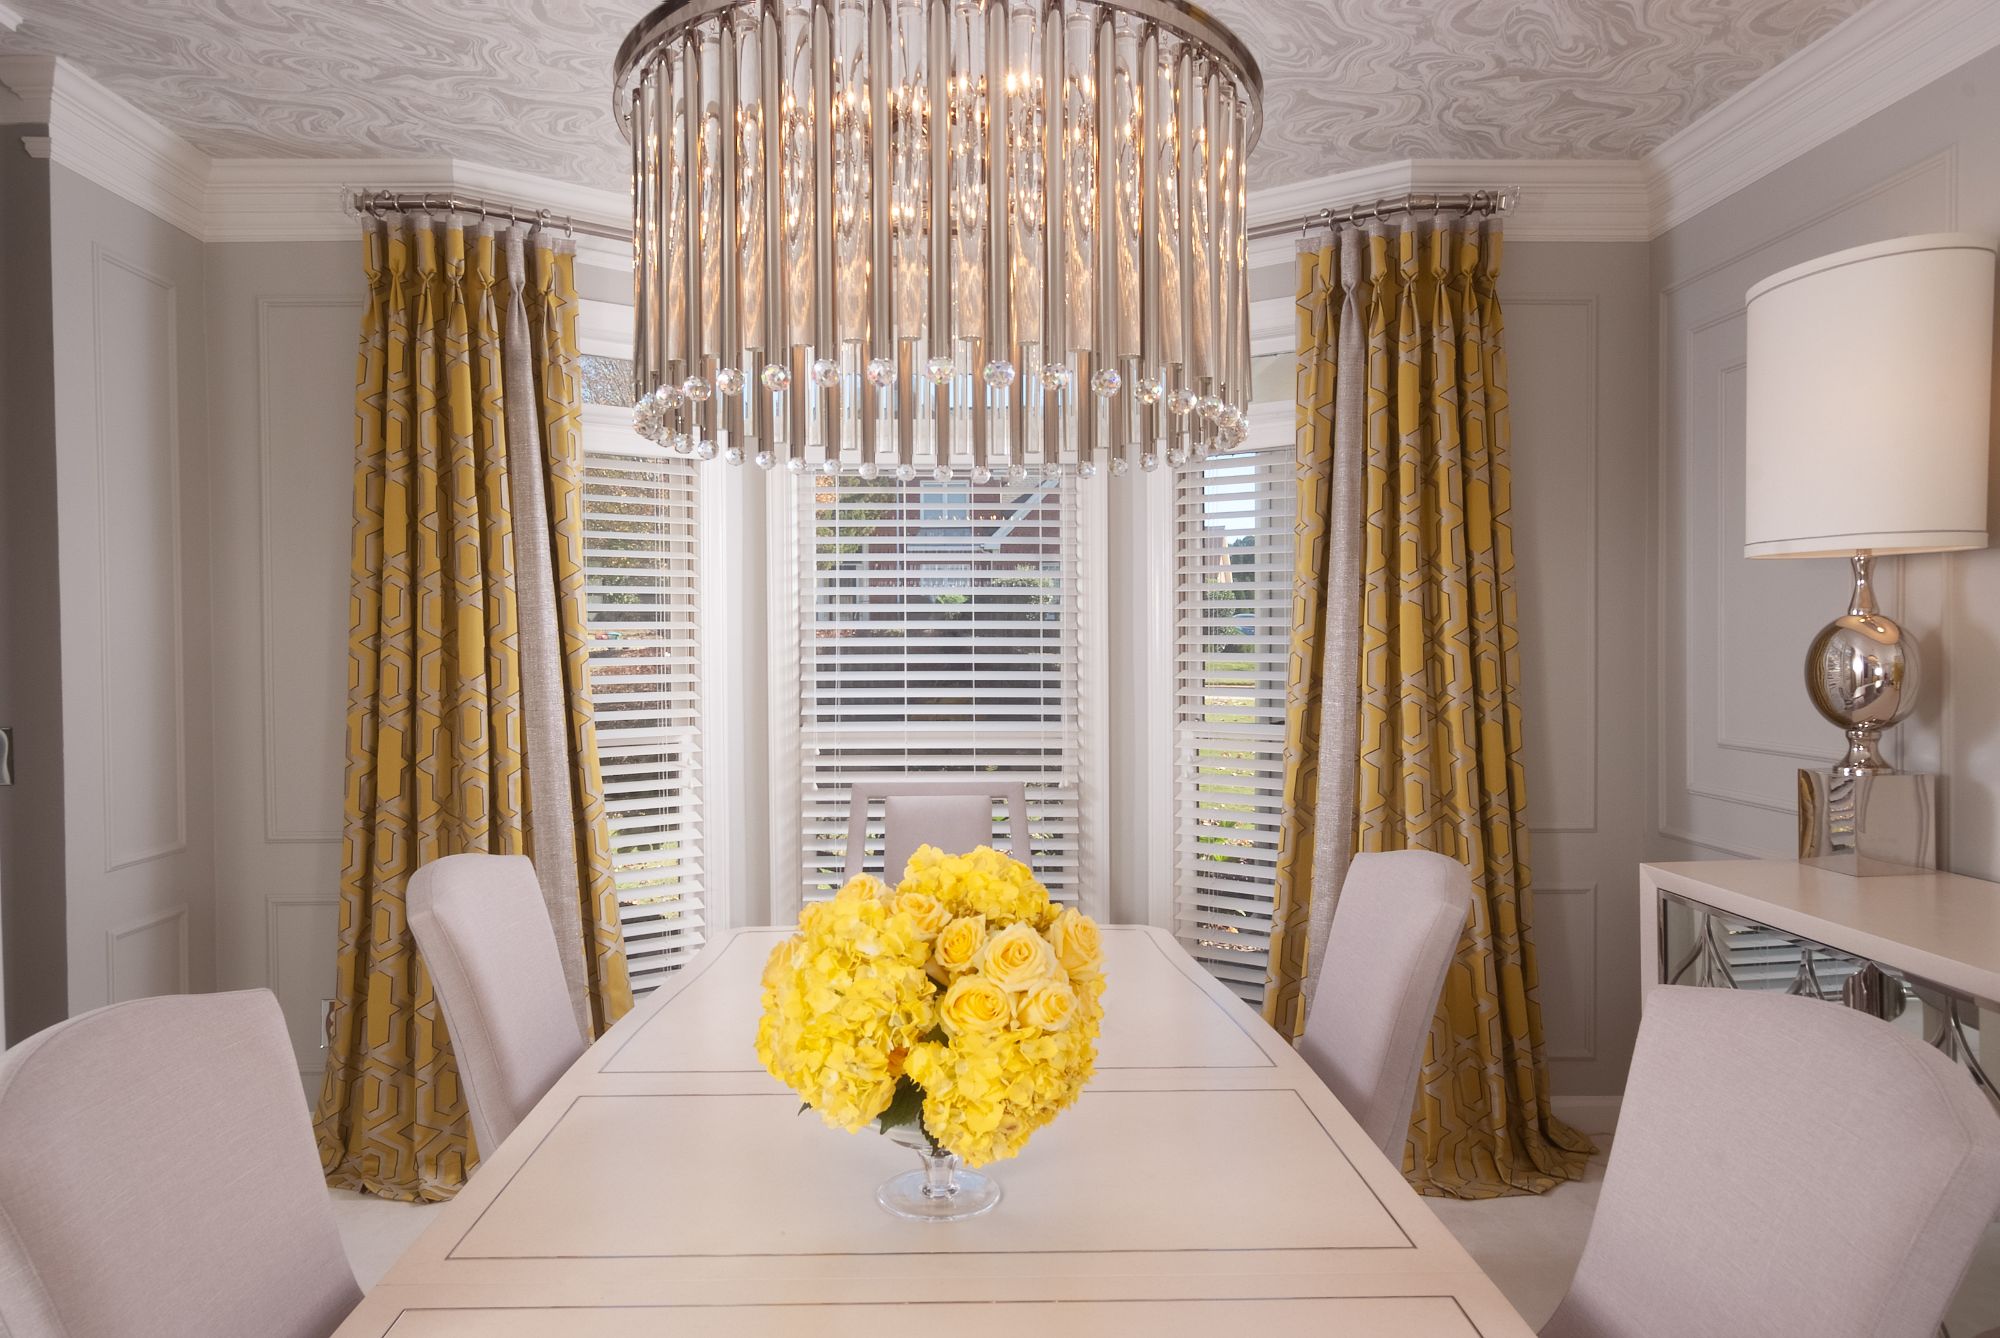 4 different window treatments to consider this summer